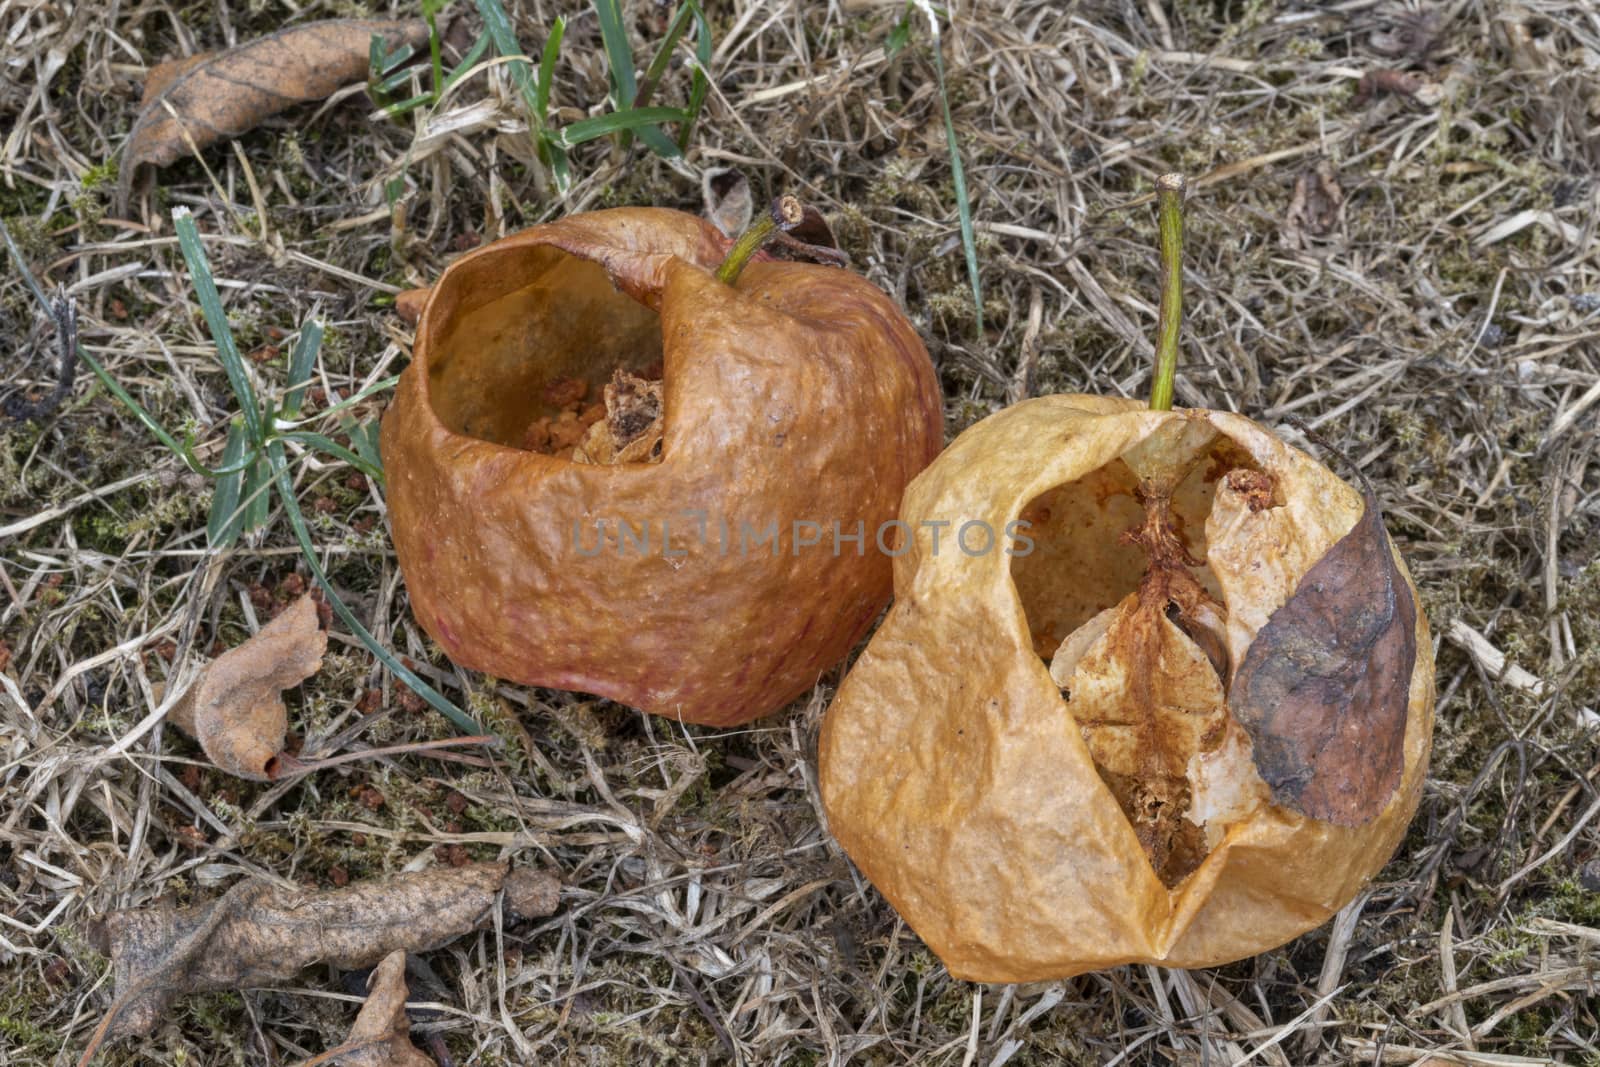 Two hollow apples on grass
 by Tofotografie